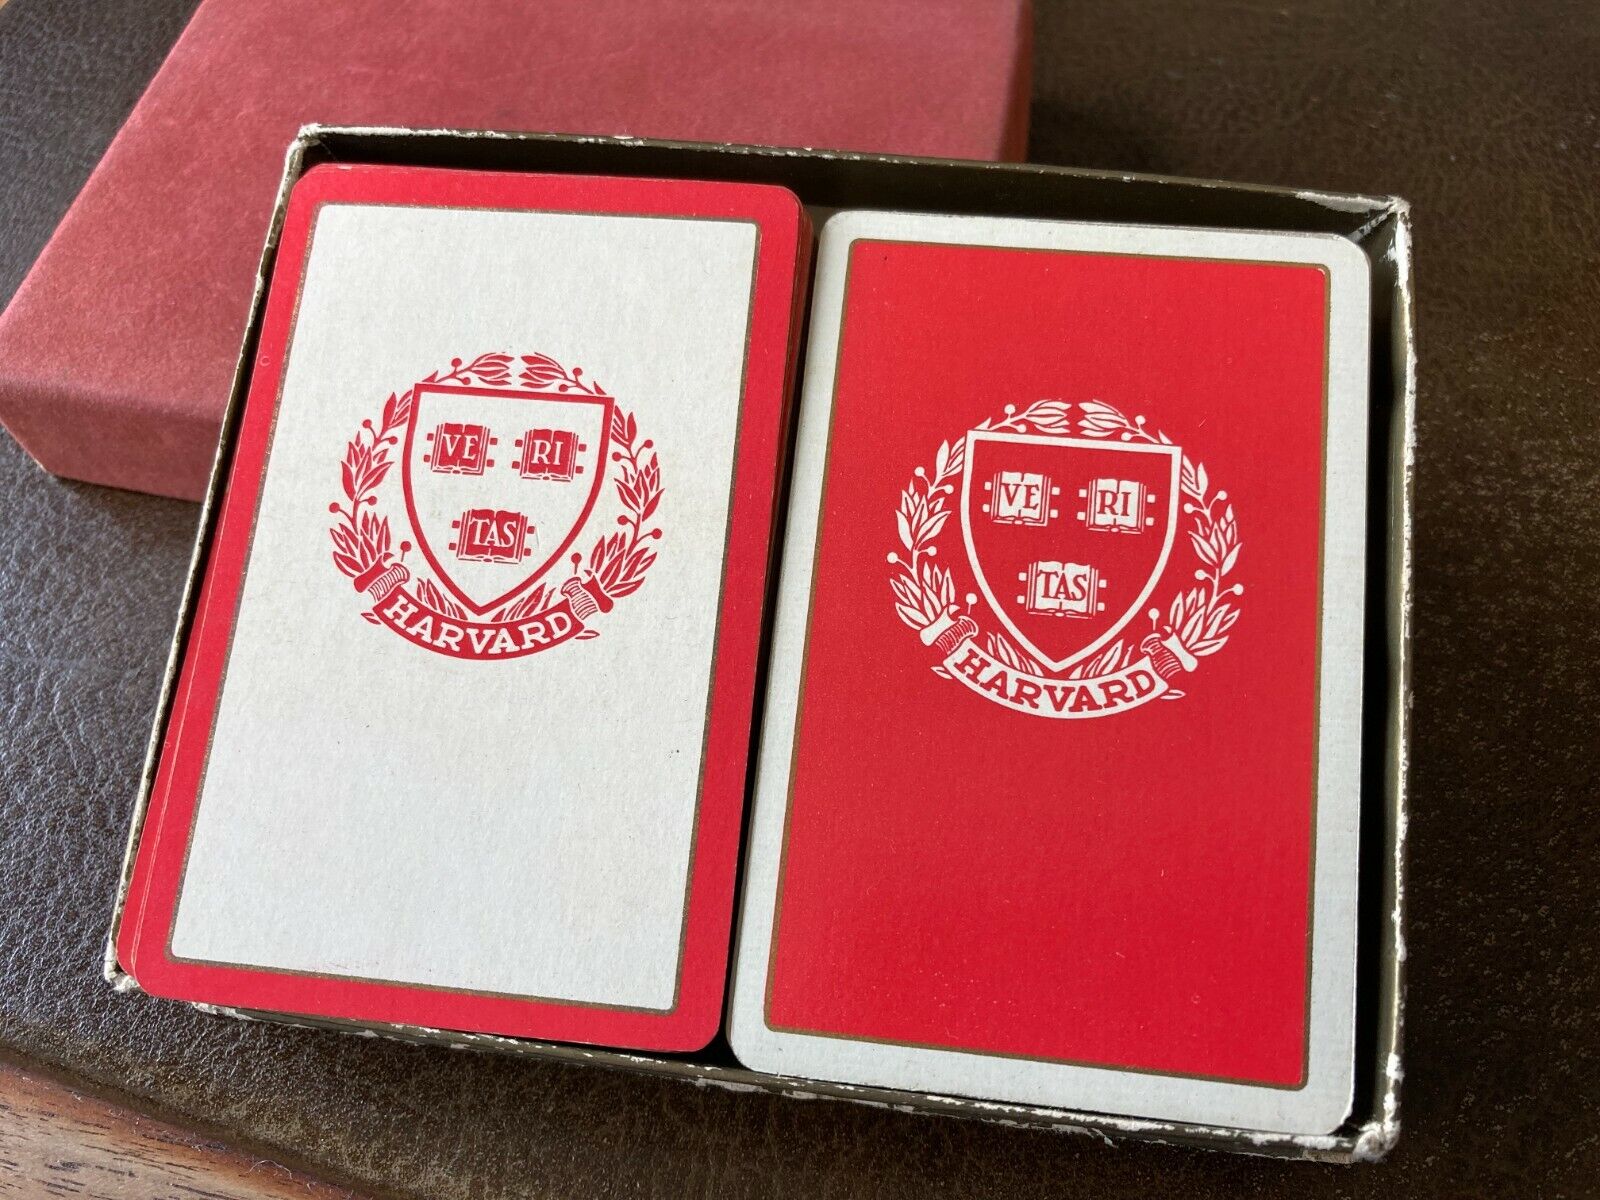 Vintage Harvard Playing Cards c1950s - 2 deck set with jokers, 52/52 and 51/52